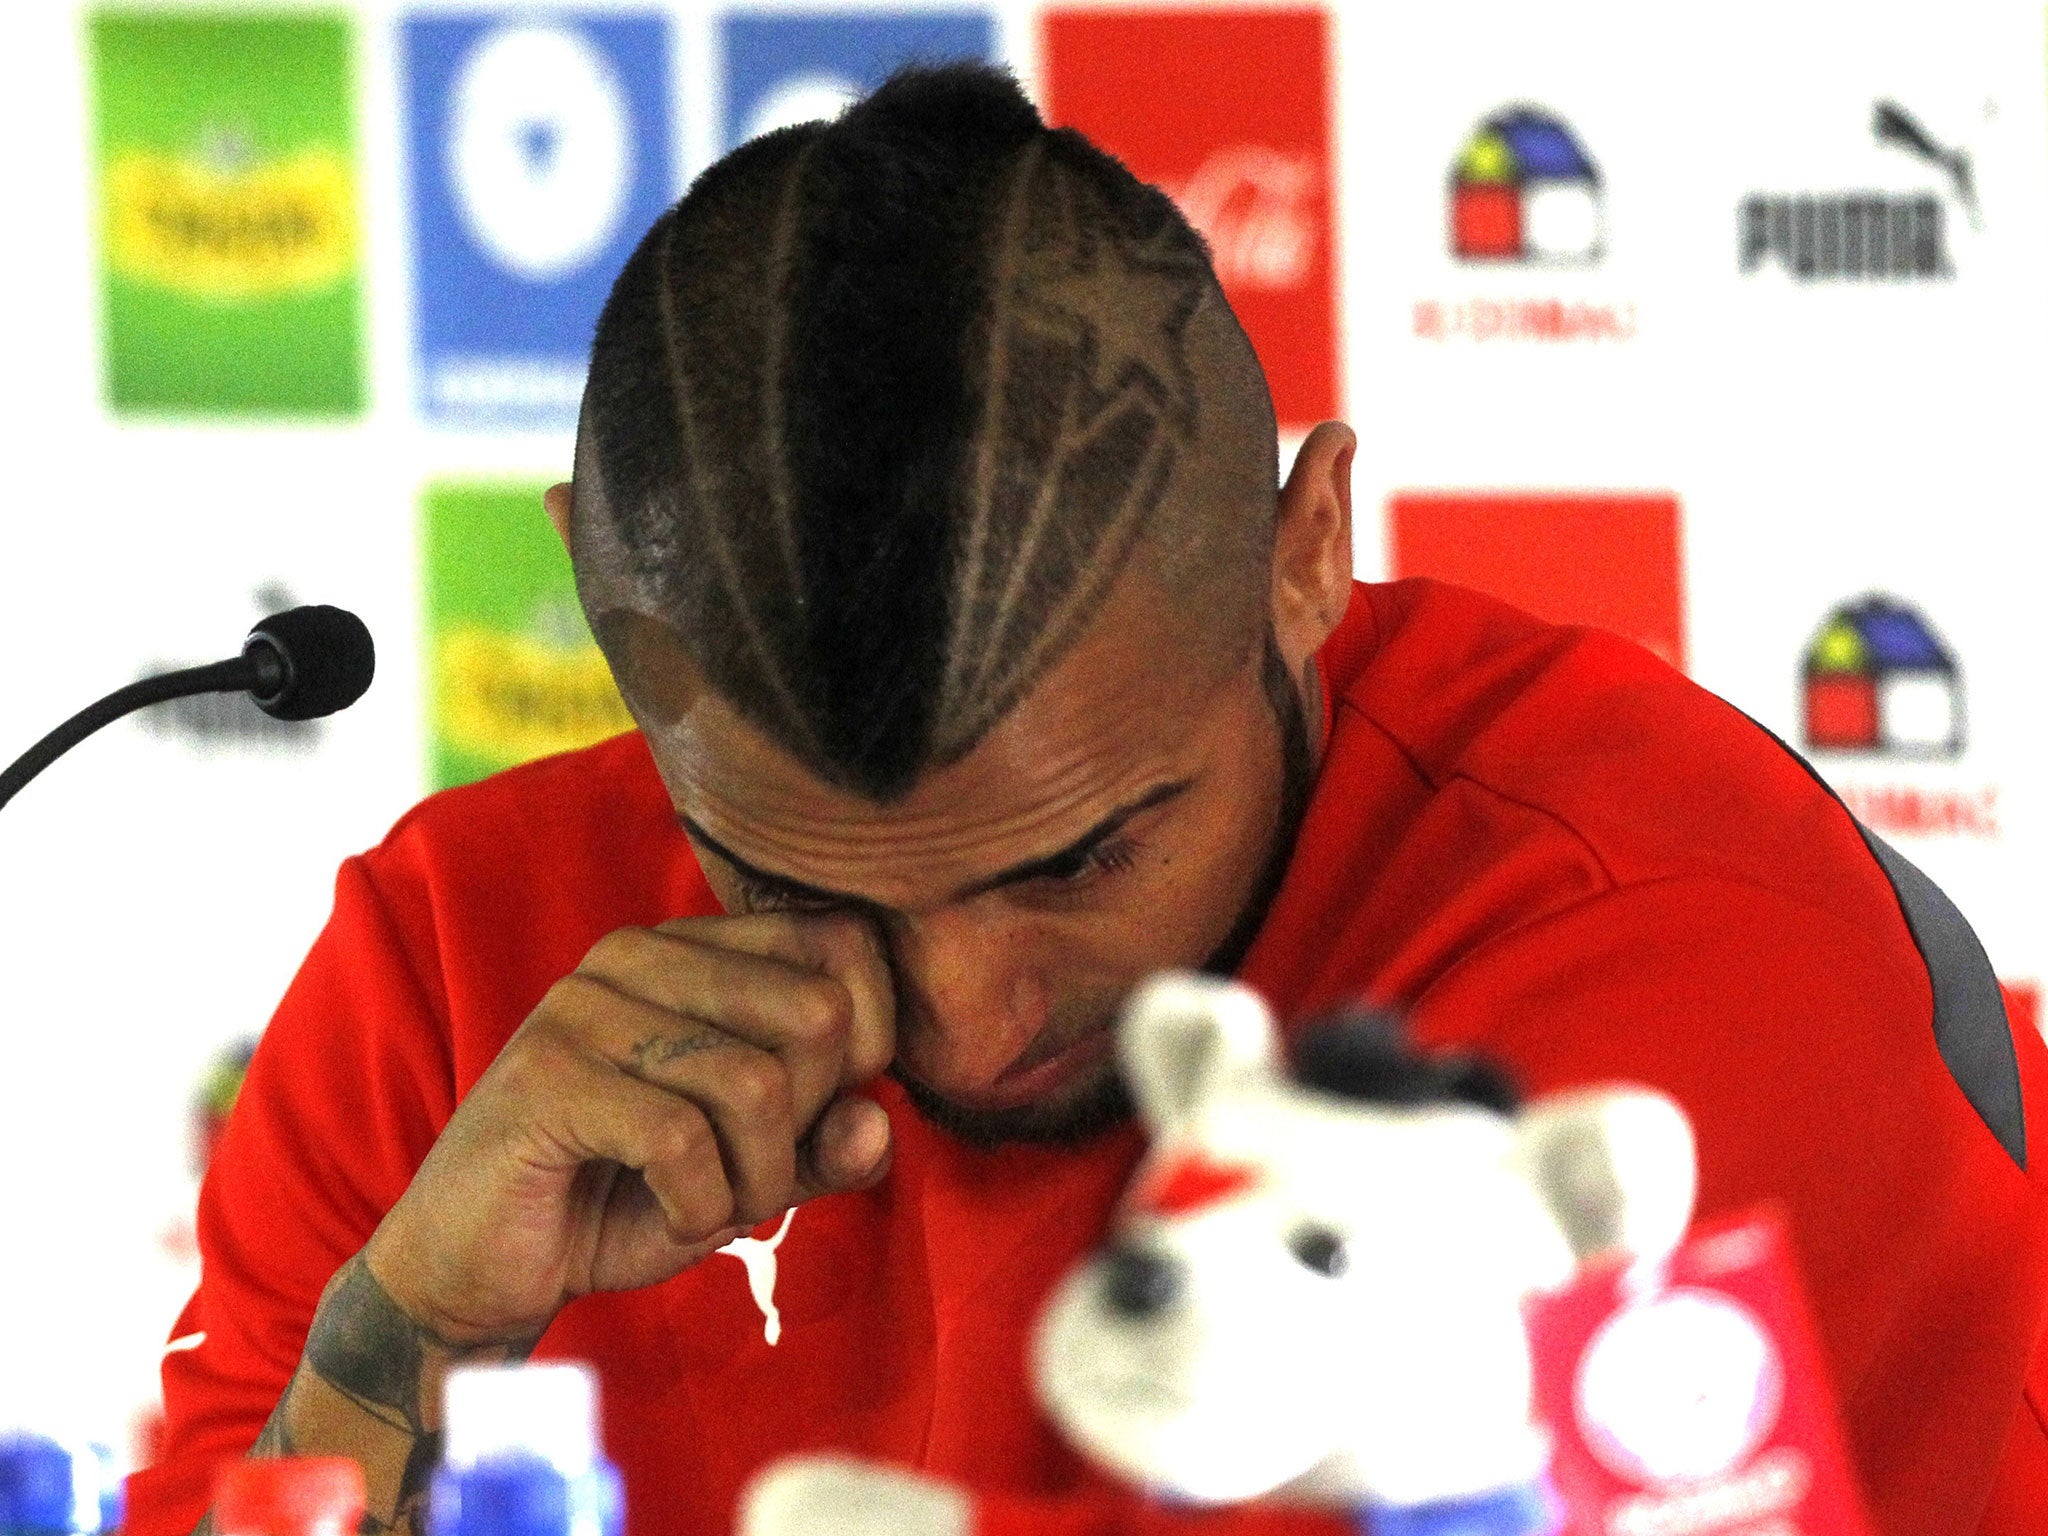 Arturo Vidal cries in a press conference after his arrest for alleged drink driving